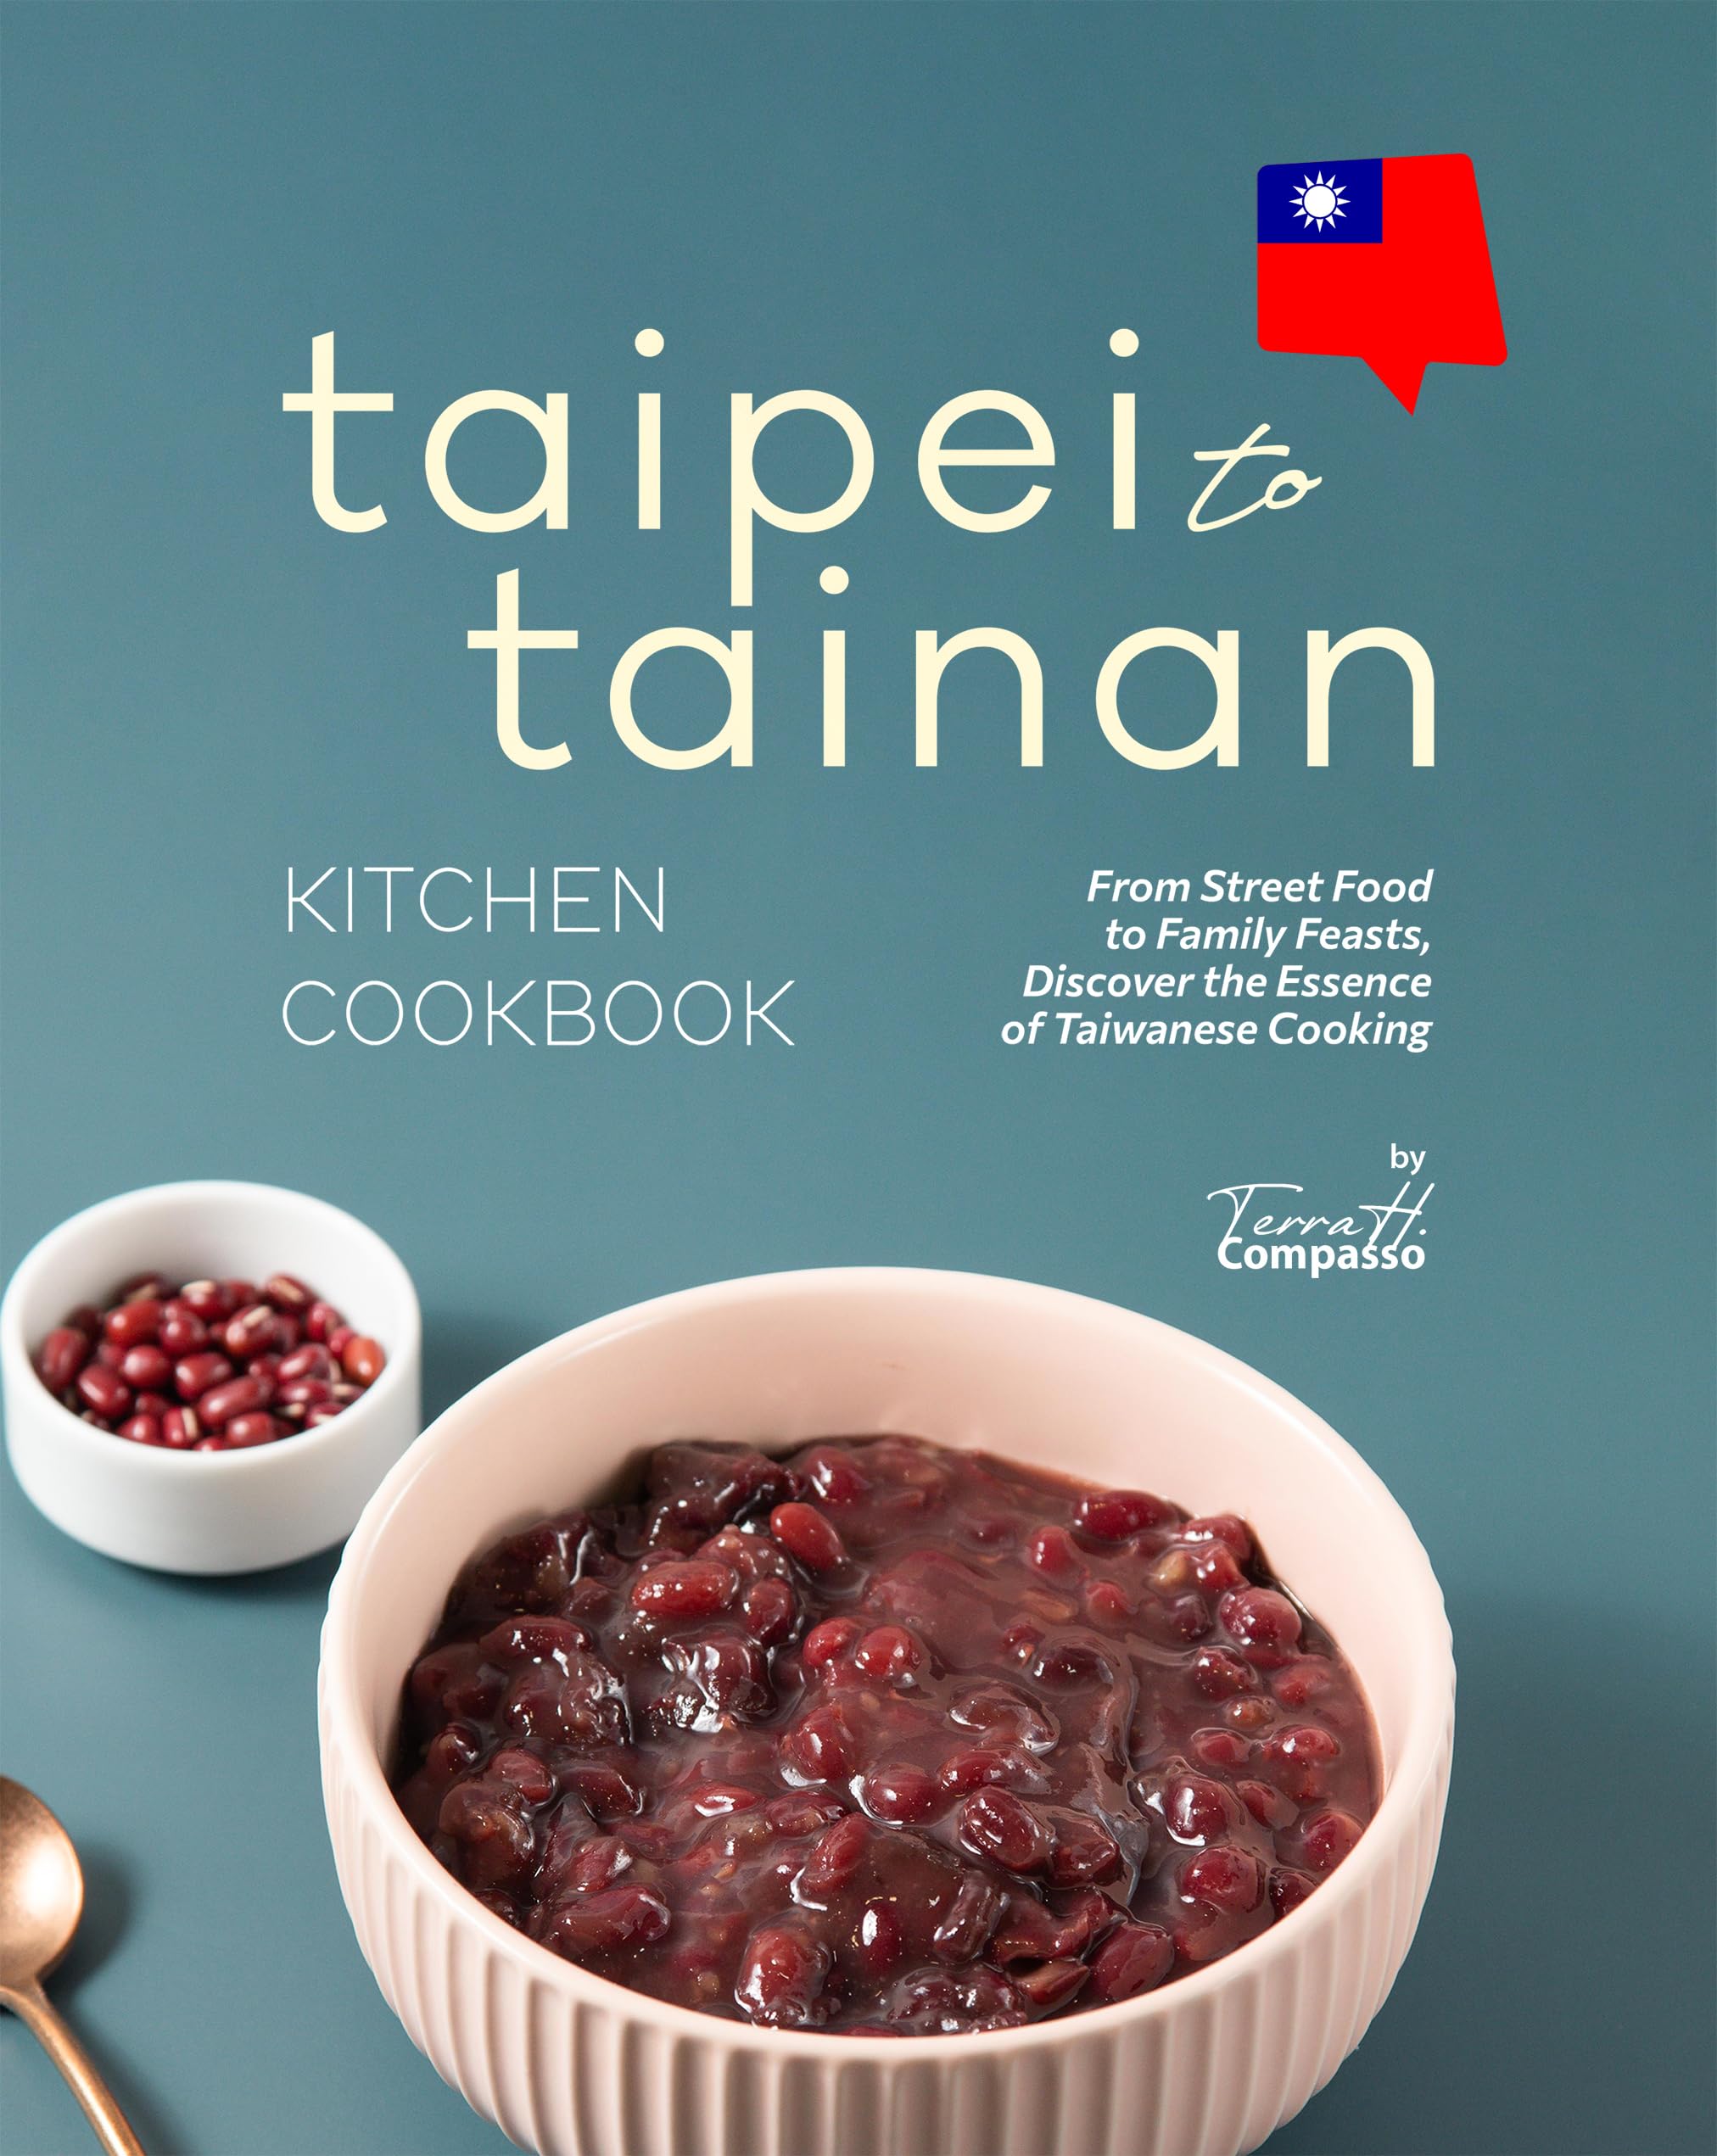 Taipei to Tainan Kitchen Cookbook: From Street Food to Family Feasts, Discover the Essence of Taiwanese Cooking